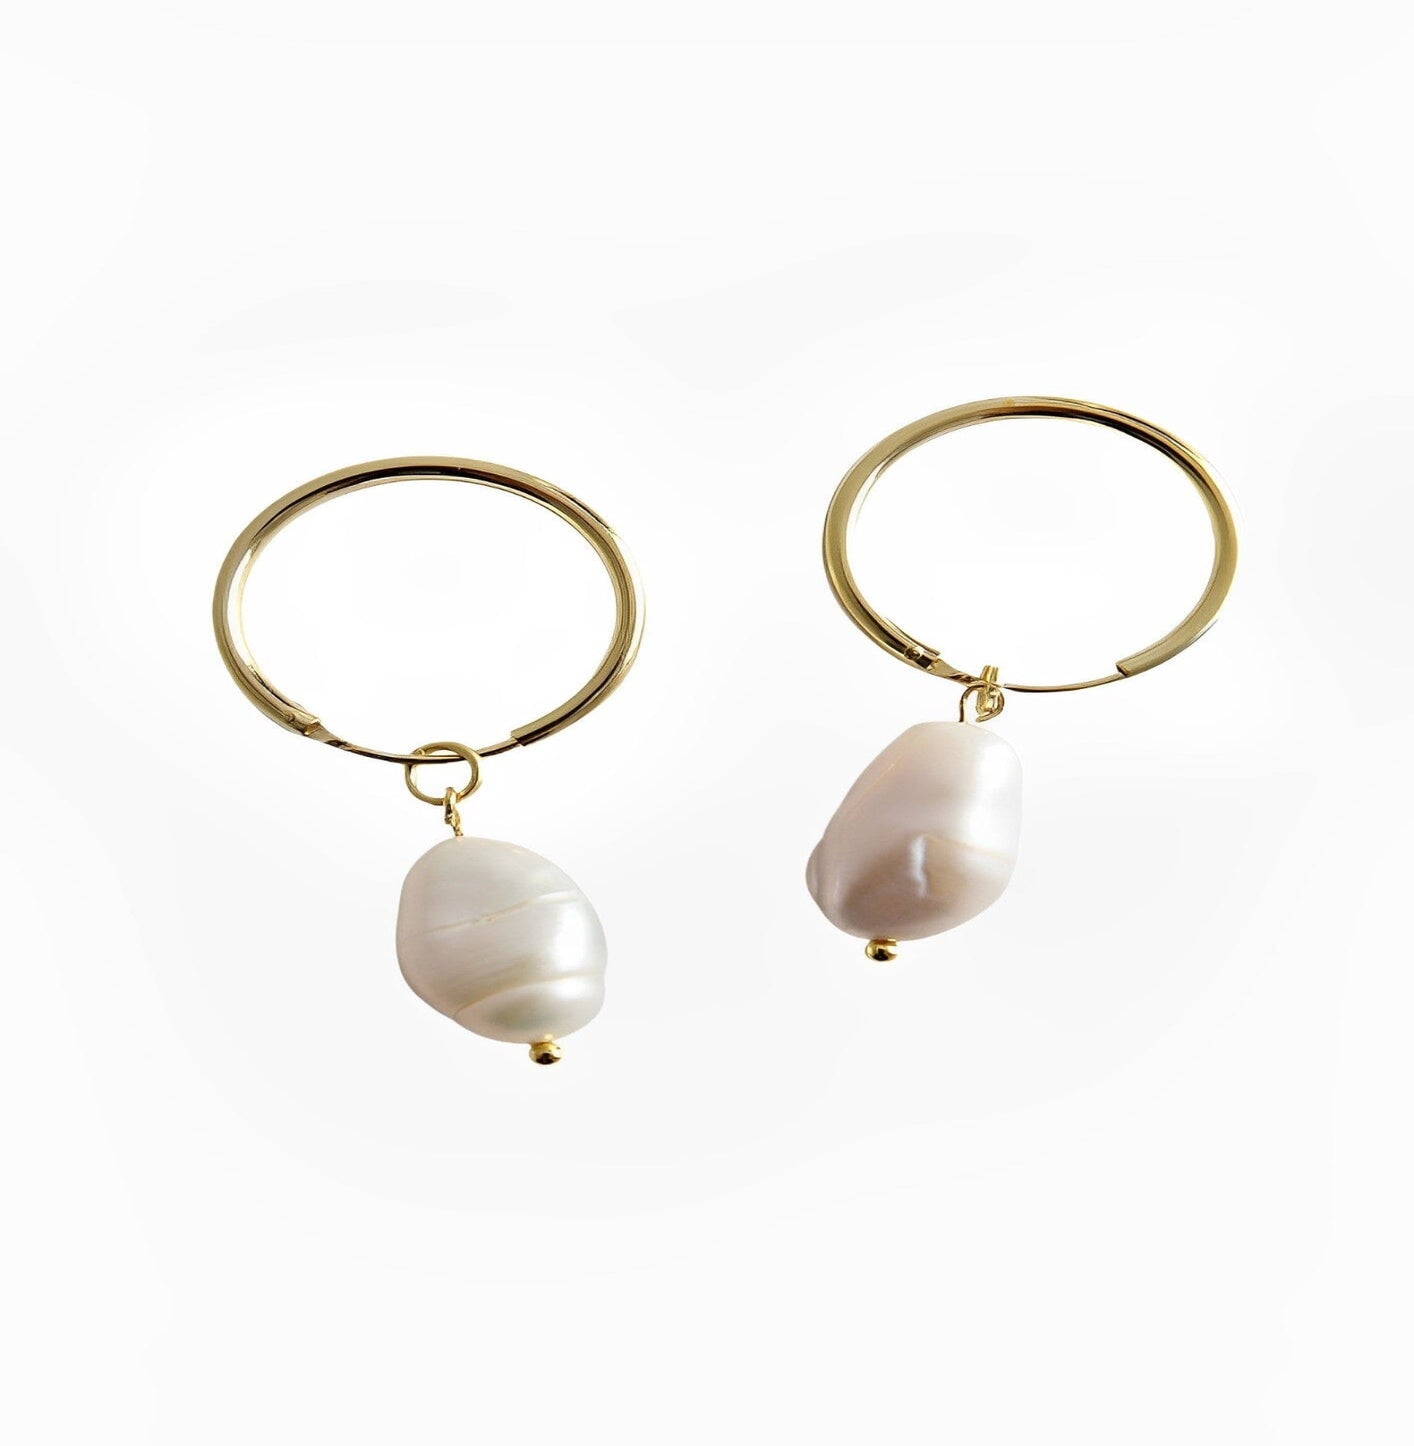 BAROQUE PEARL EARRINGS earing Yubama Jewelry Online Store - The Elegant Designs of Gold and Silver ! 